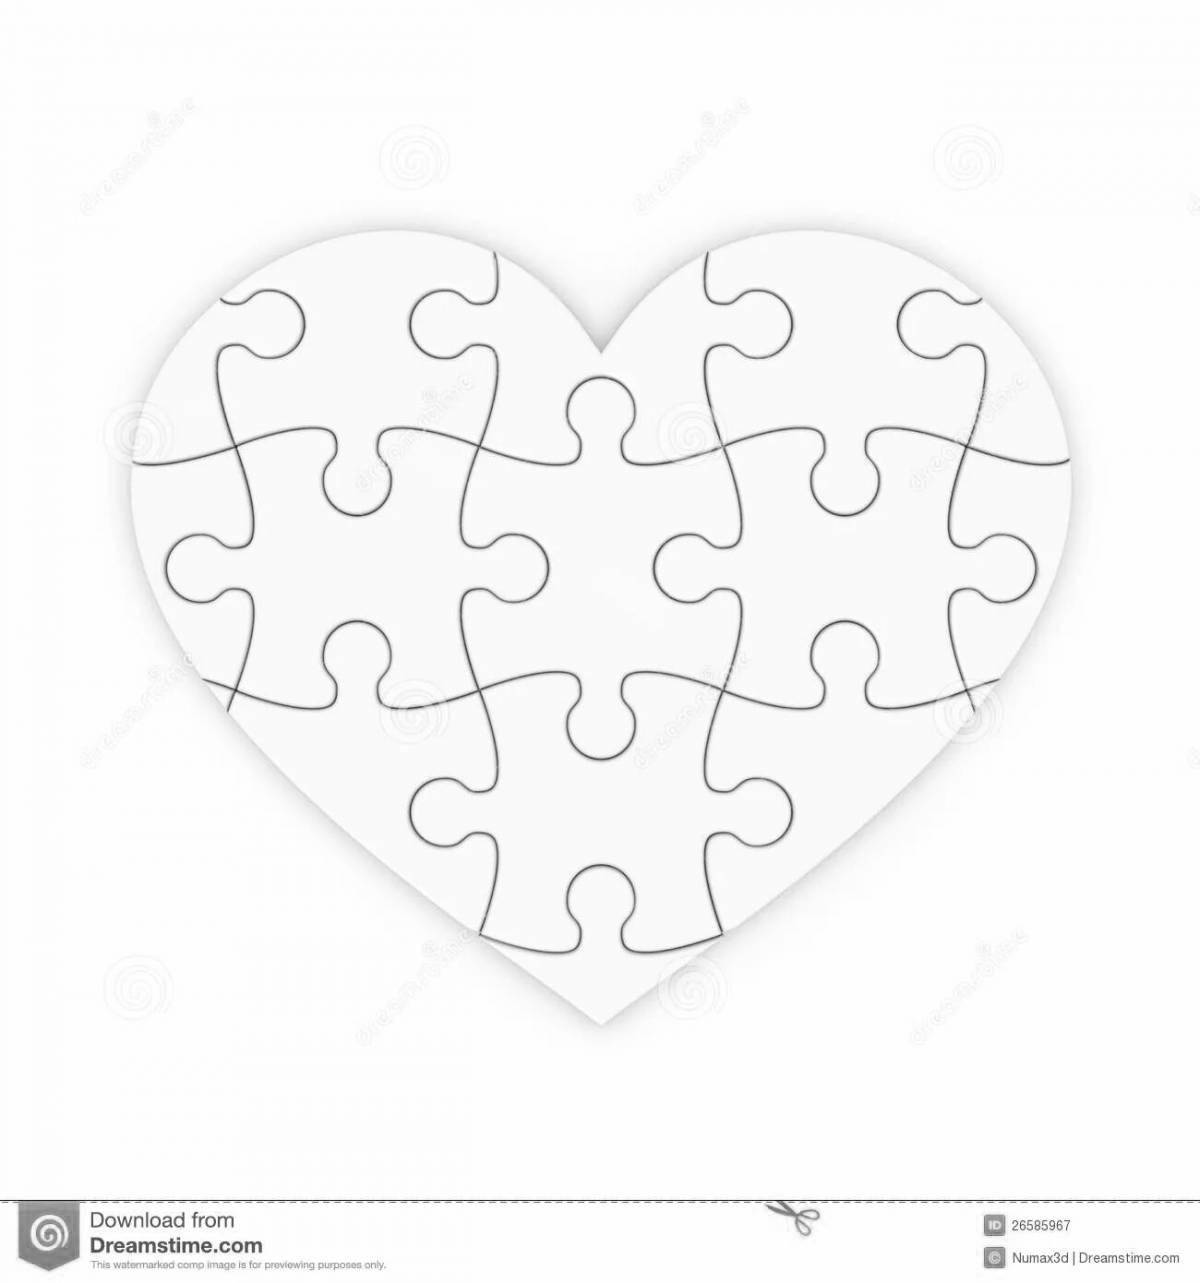 Delightful heart puzzle page